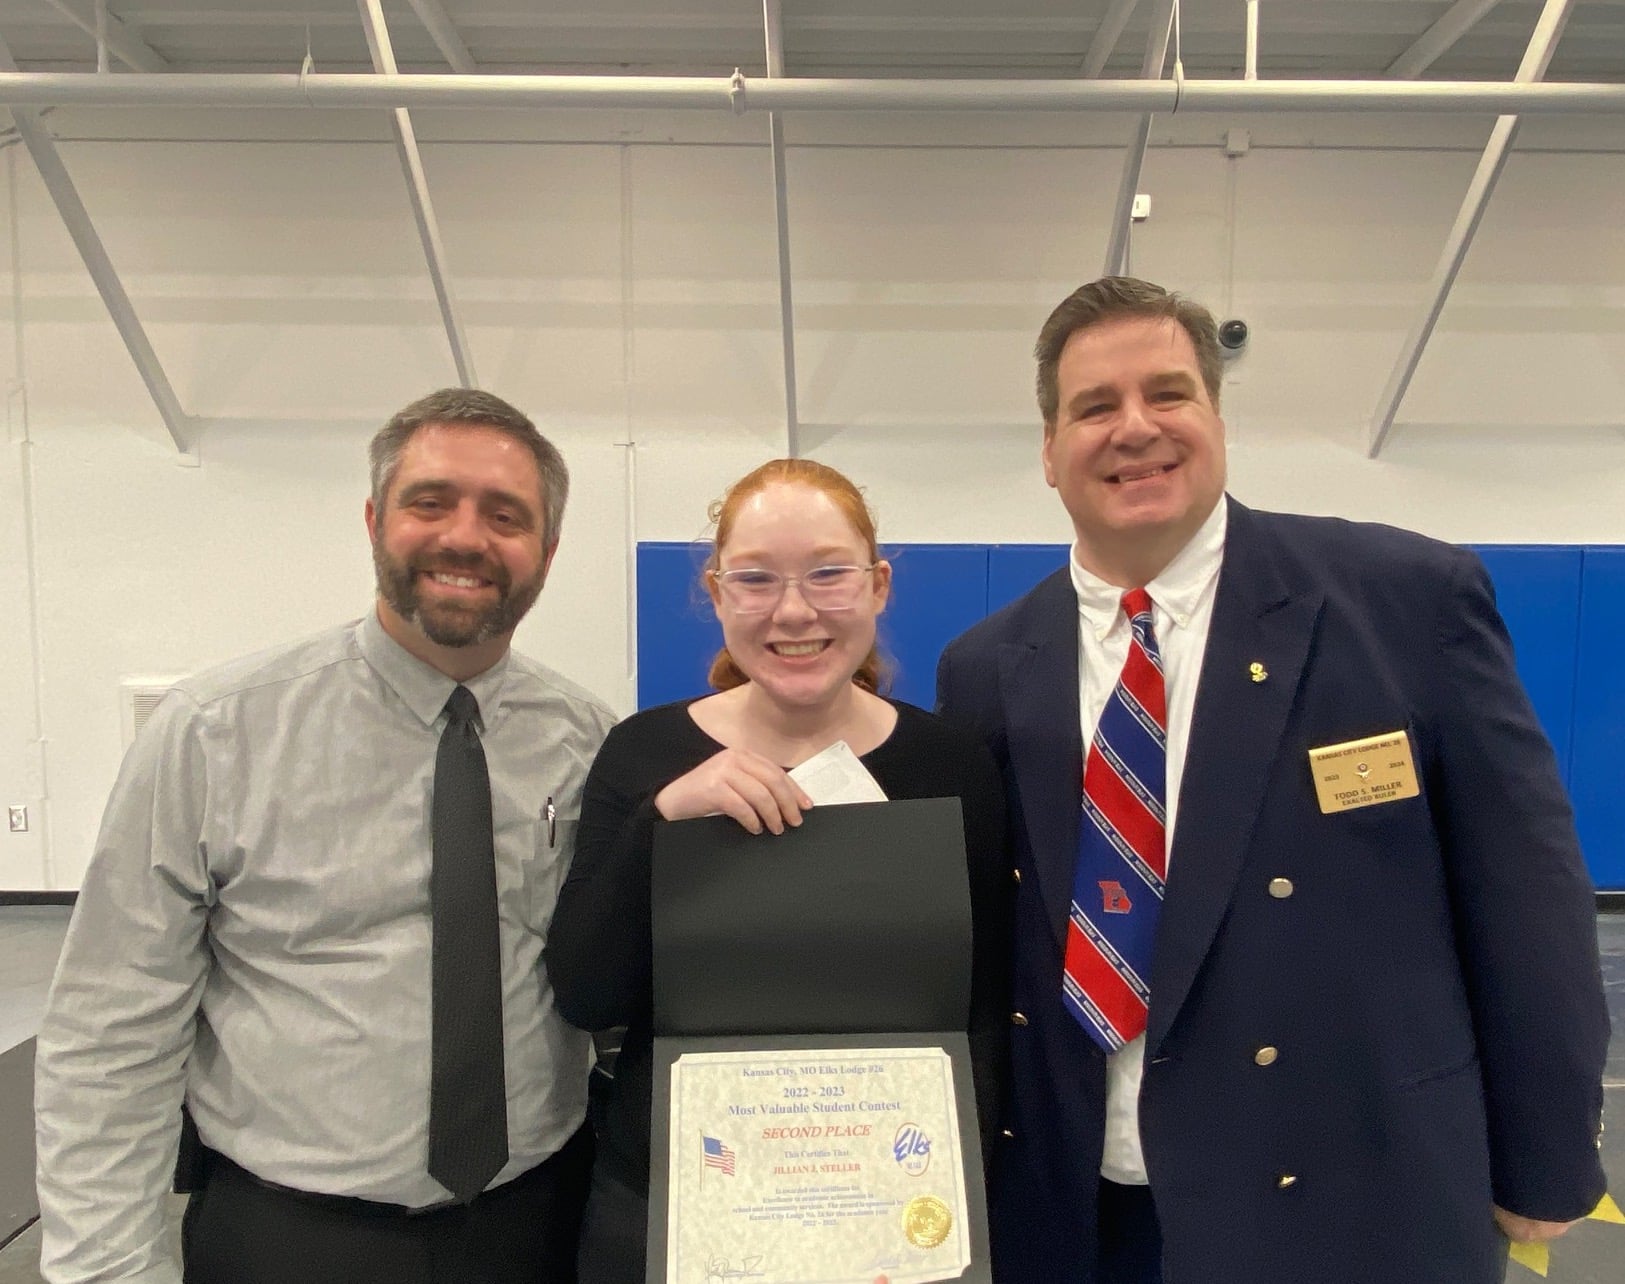 SCA senior Jillian Steller, pictured with SCA Assistant Secondary Principal Anthony Mickelson and Todd Miller from Elks Lodge, was the second place recipient of the Elks Lodge #26 Most Valuable Student Contest and Scholarship.